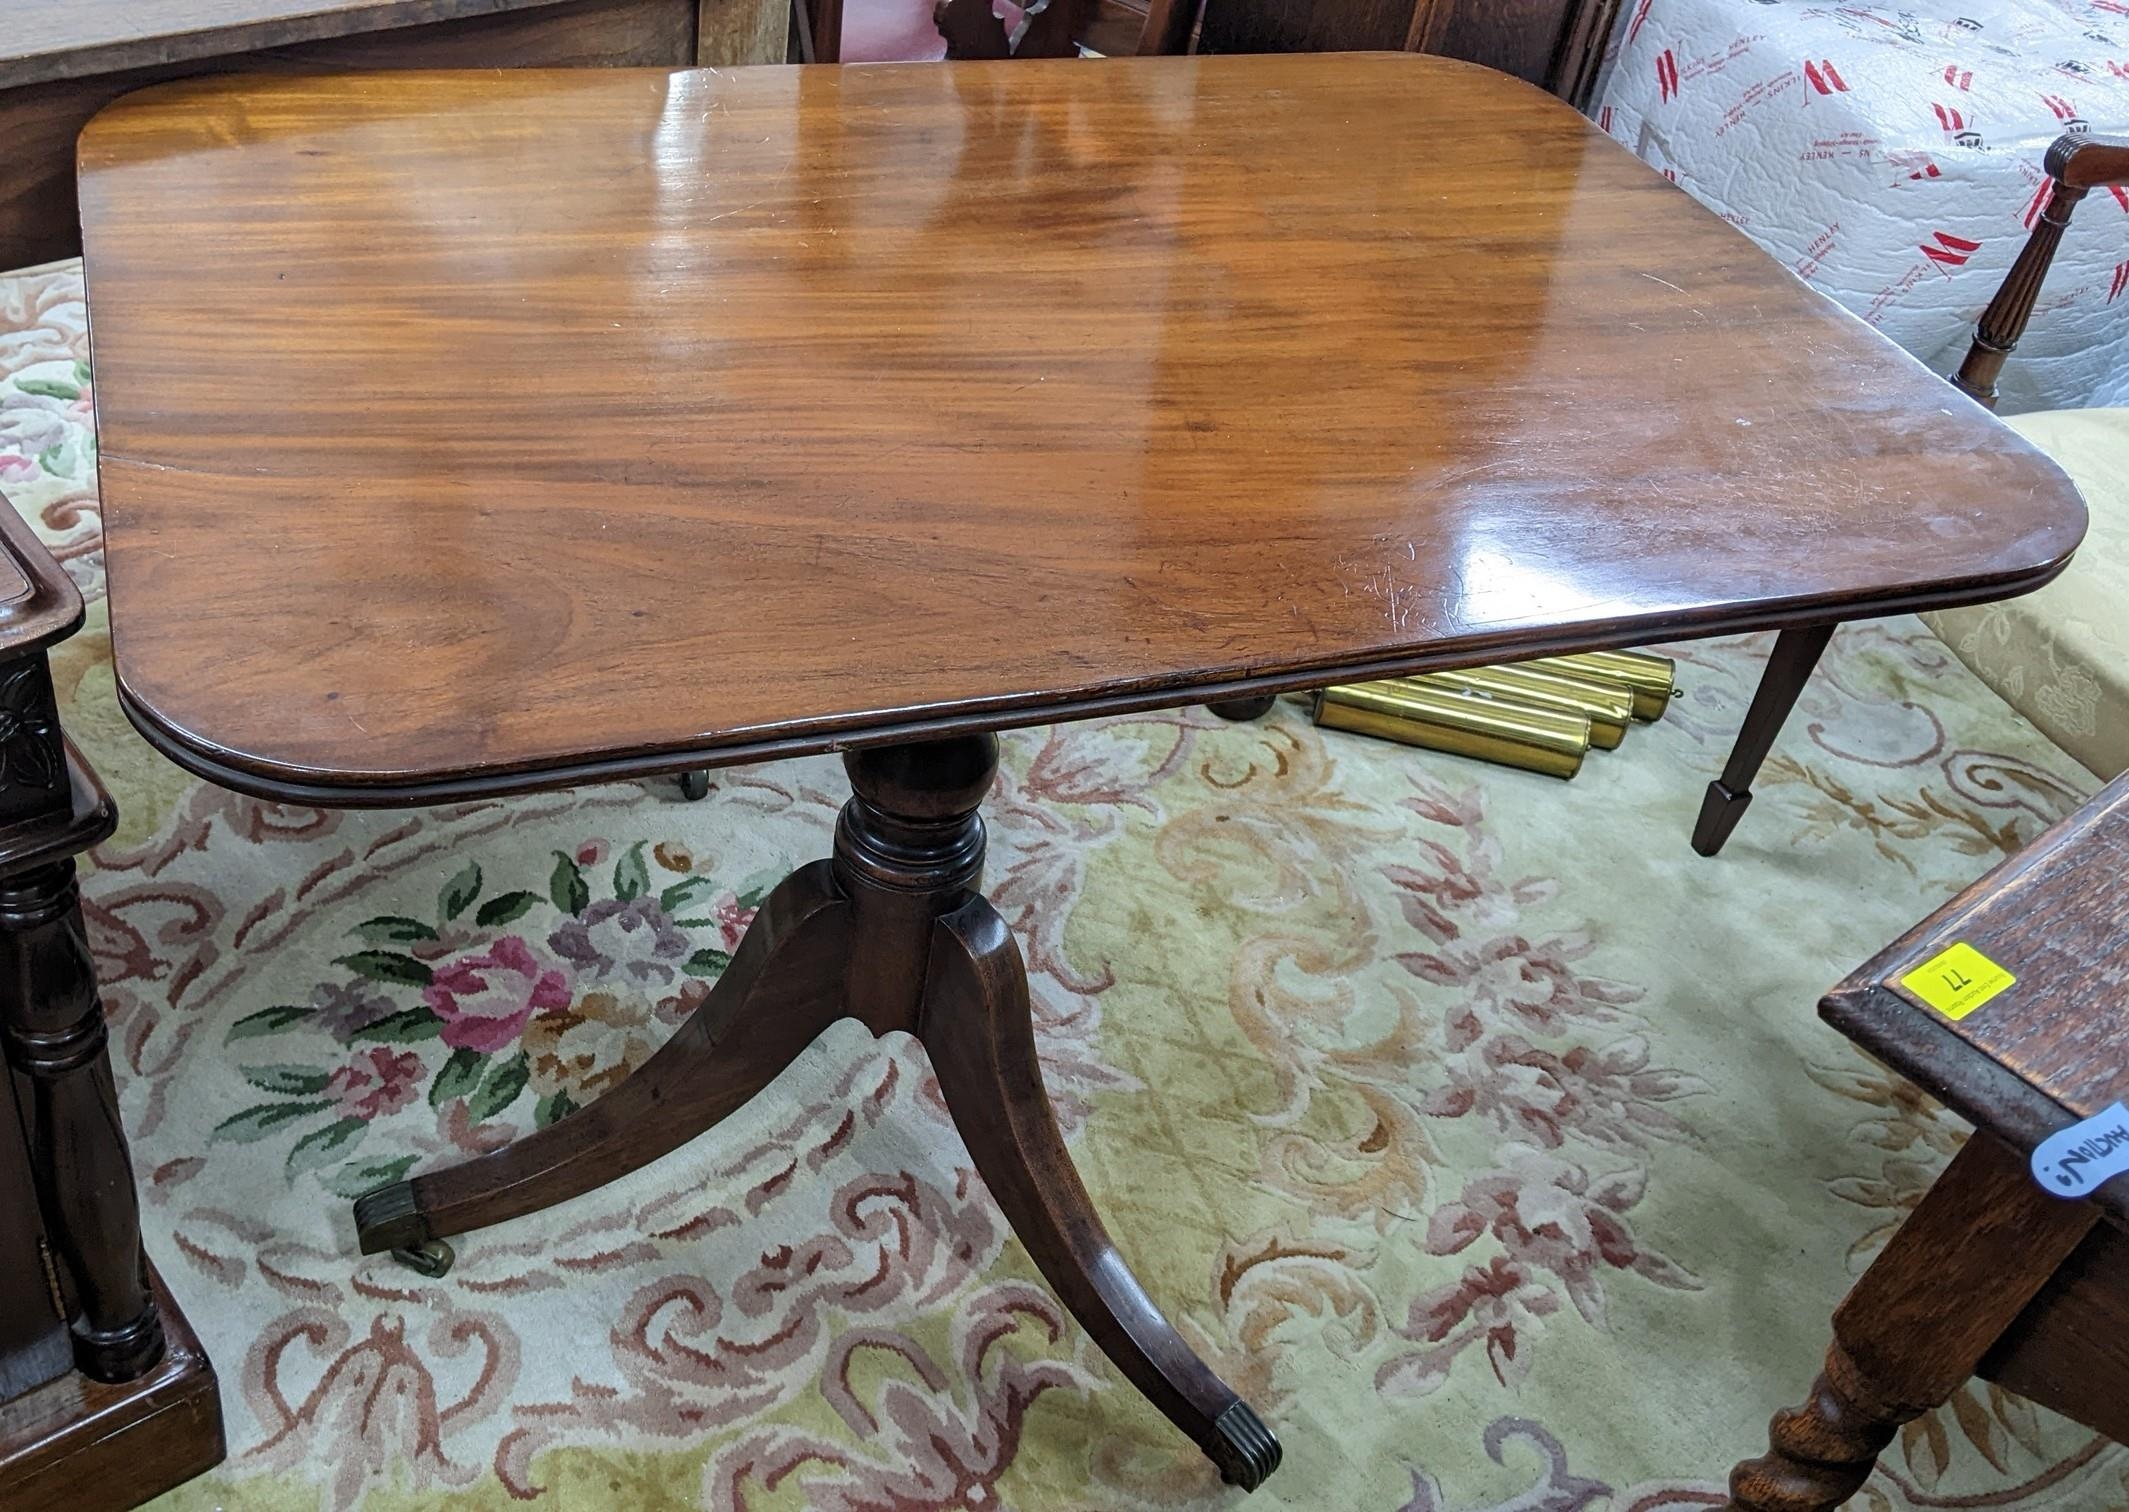 An early 20th century Regency style mahogany occasional table having a turned column and three